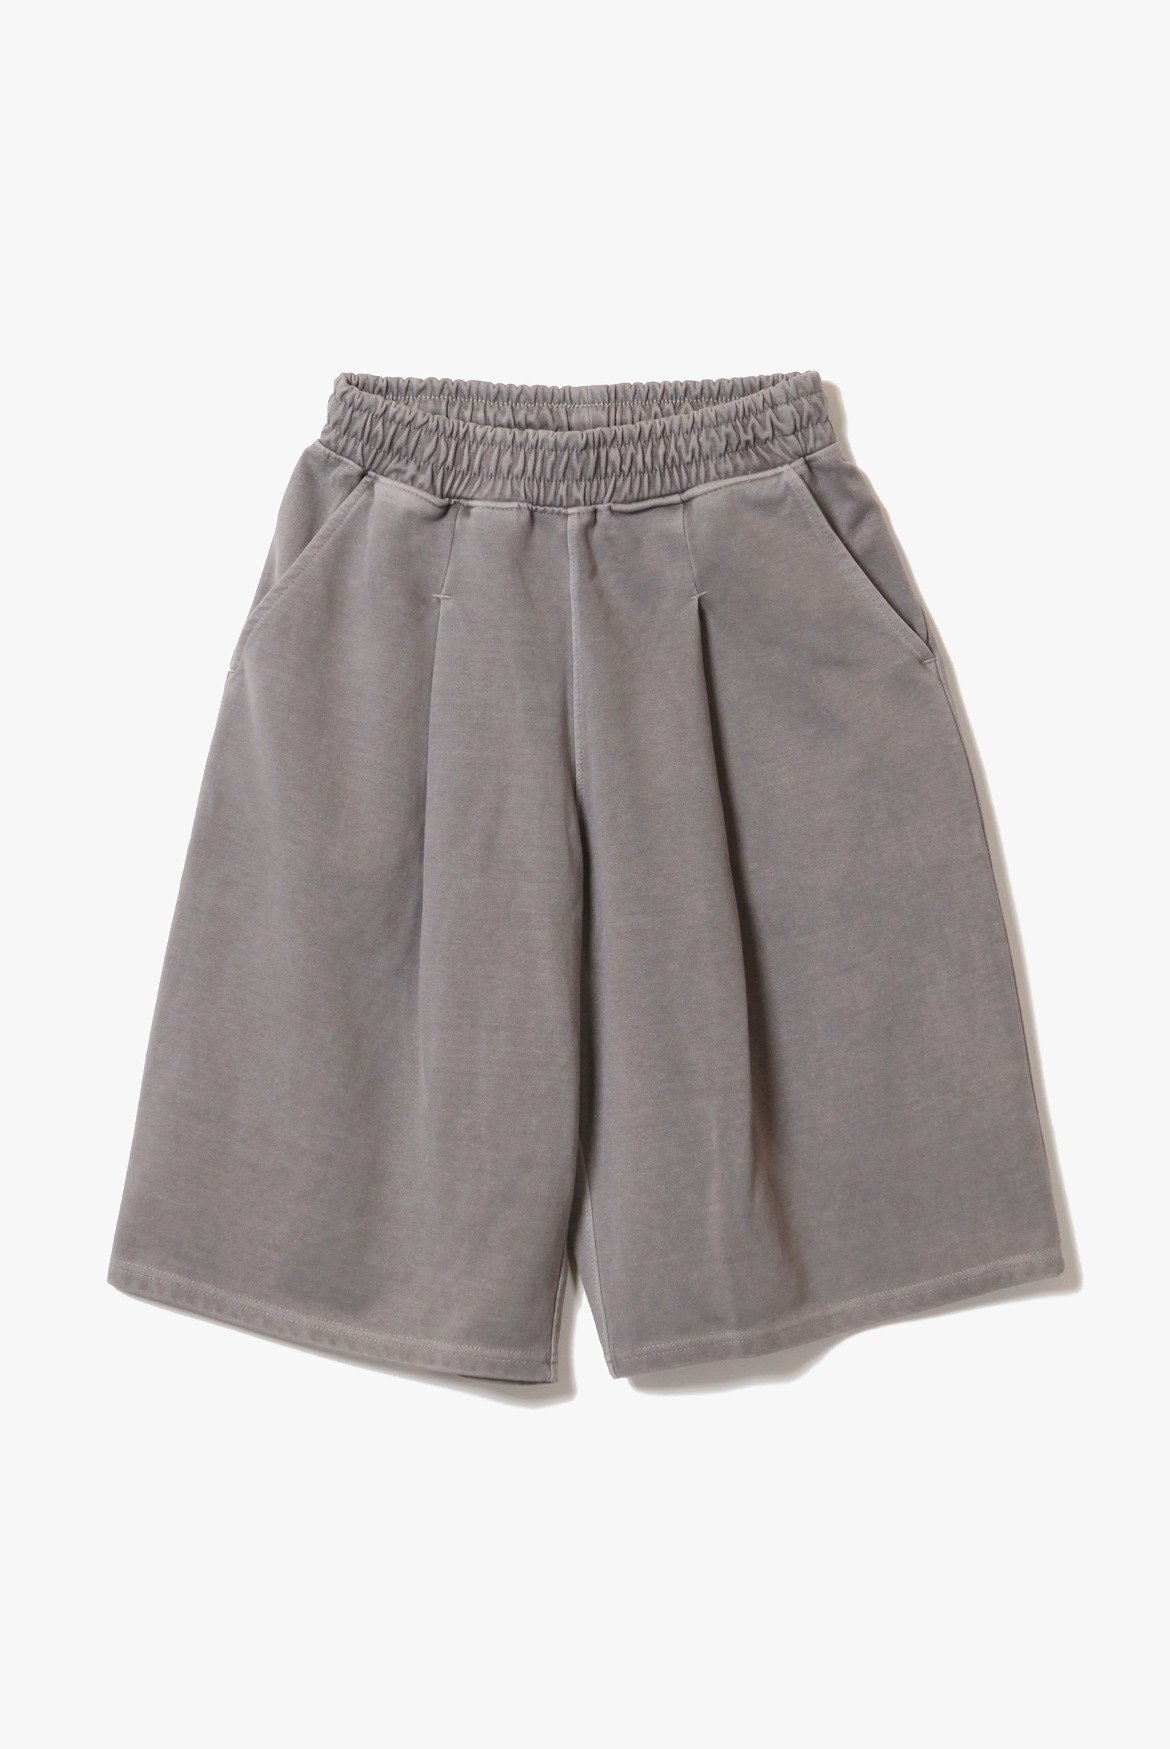 Deep One Tuck Pigment Sweat Shorts [Cement]